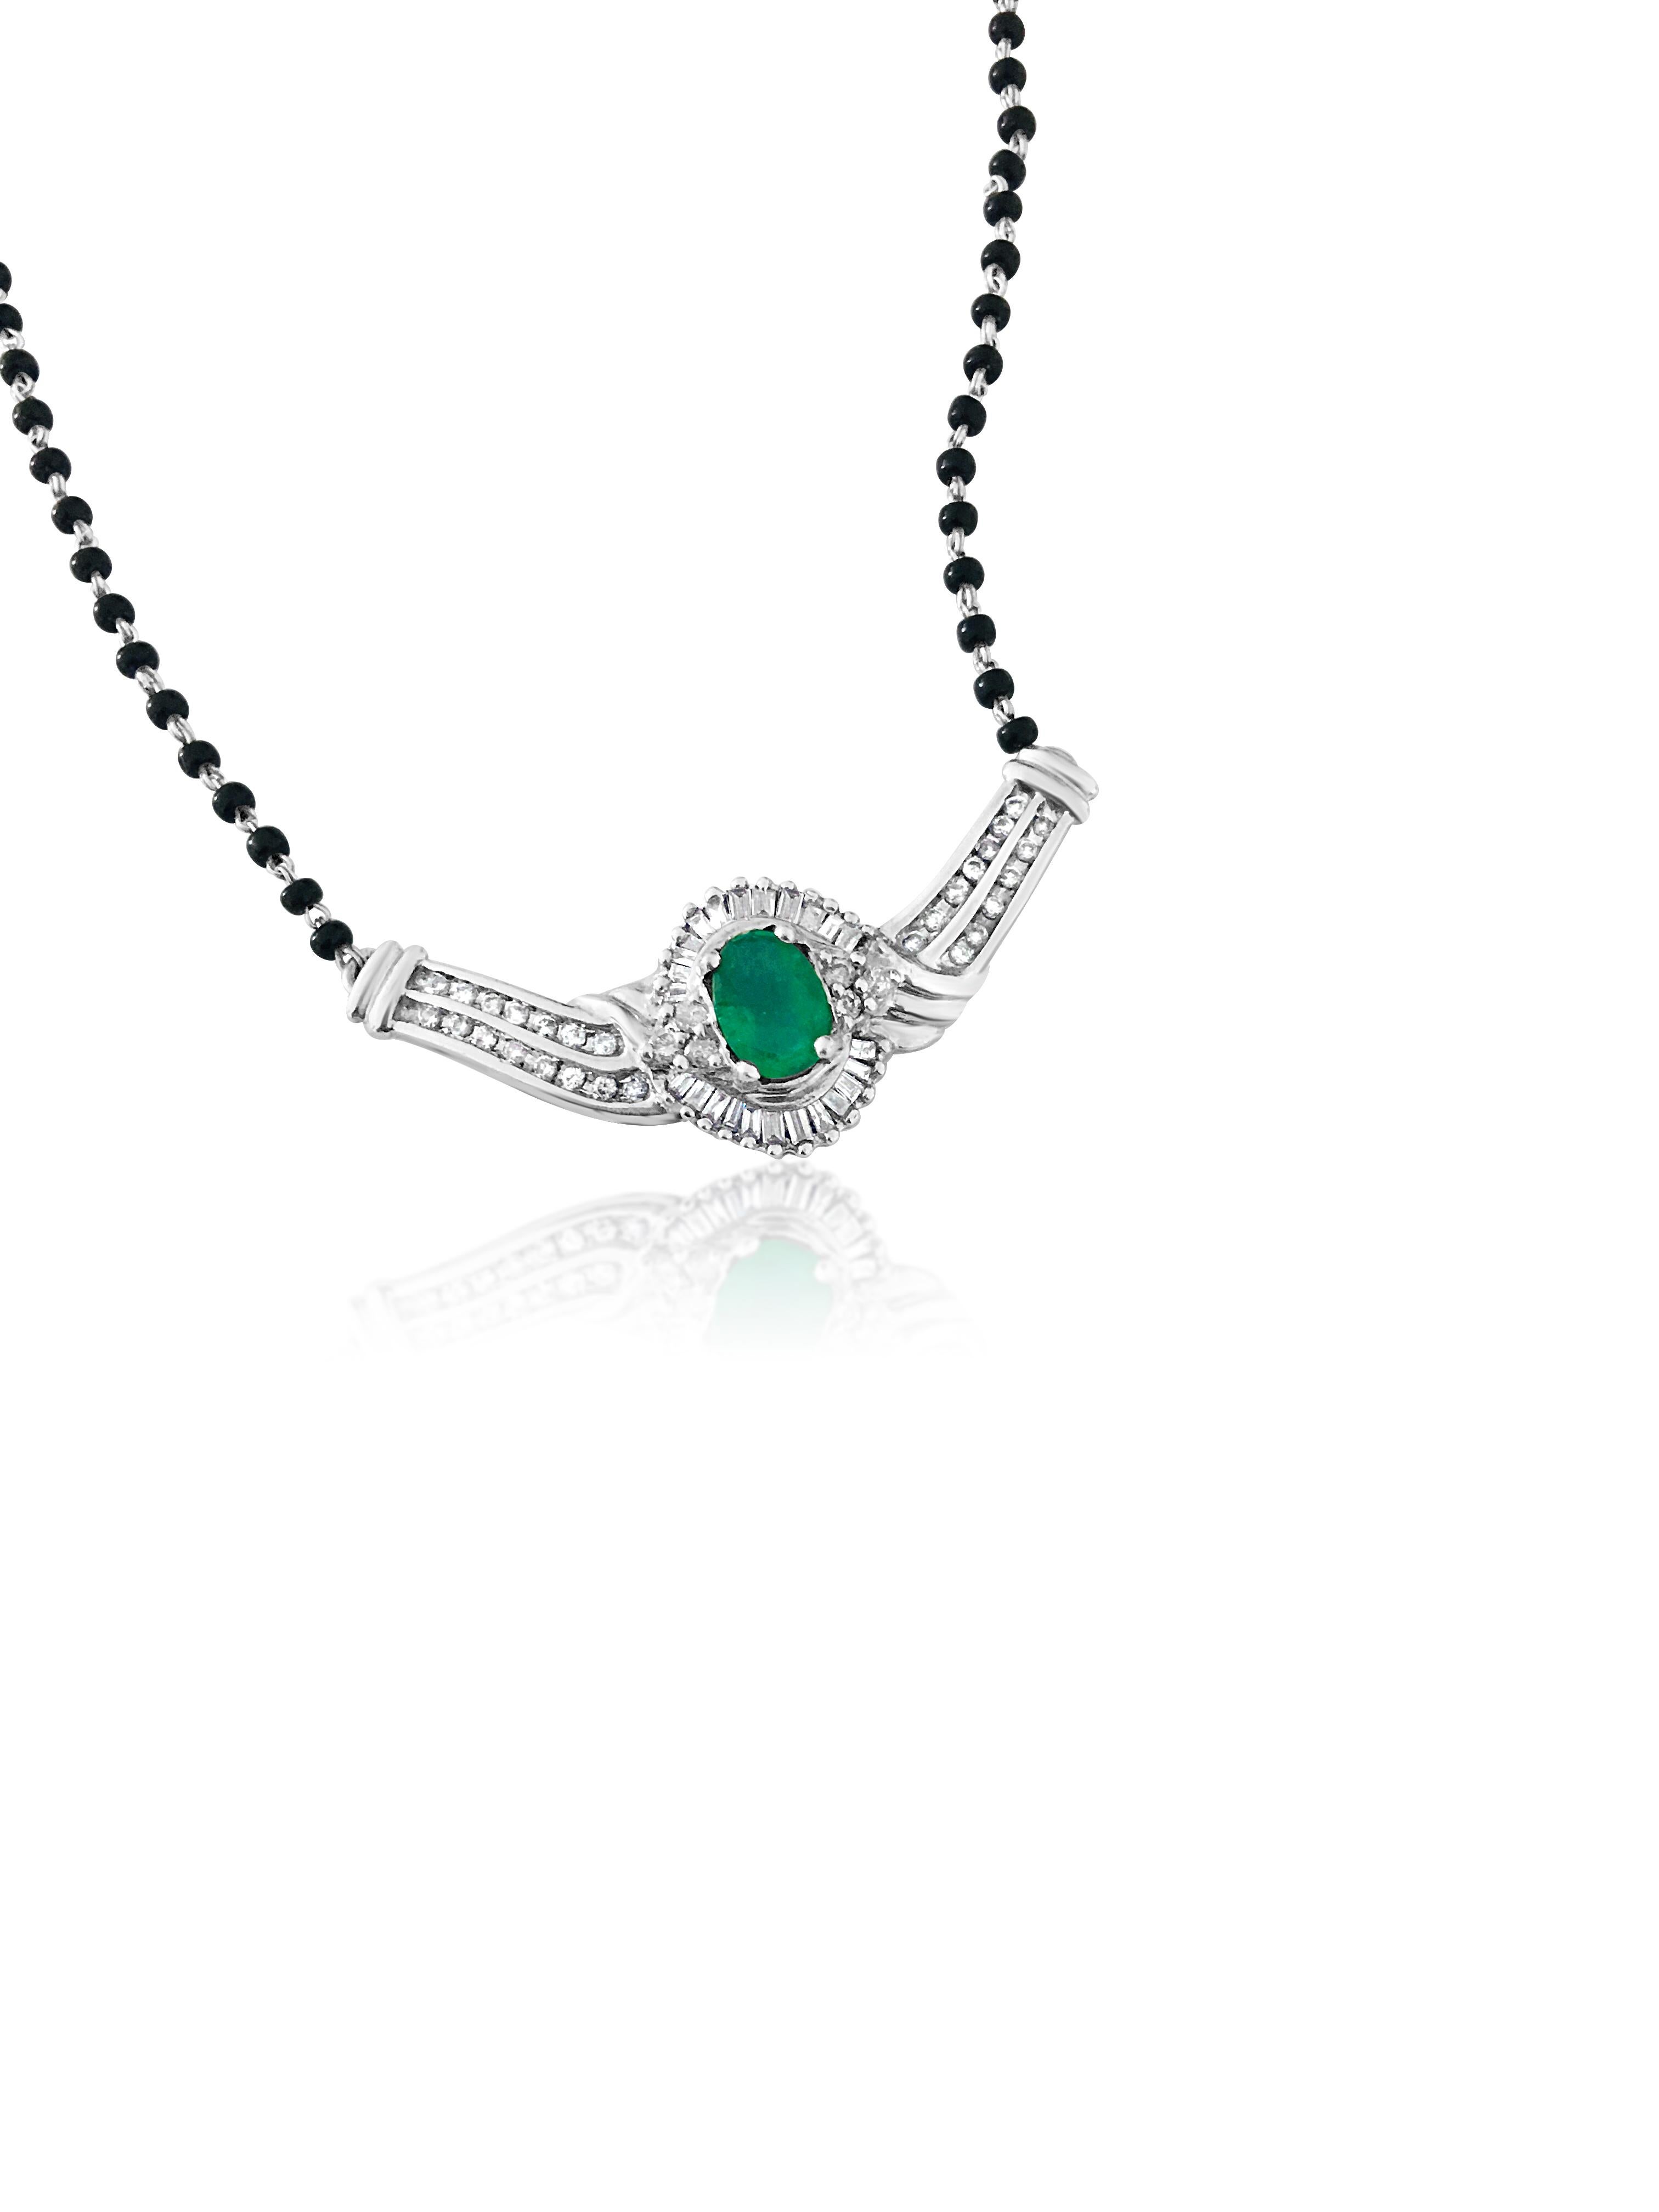 This exquisite necklace boasts a stunning 3.00 carat oval cut Colombian emerald, set elegantly in prongs crafted from 14k white gold. Adorned with a total of 1.10 carats of round brilliant cut and baguette cut diamonds, all meticulously set in